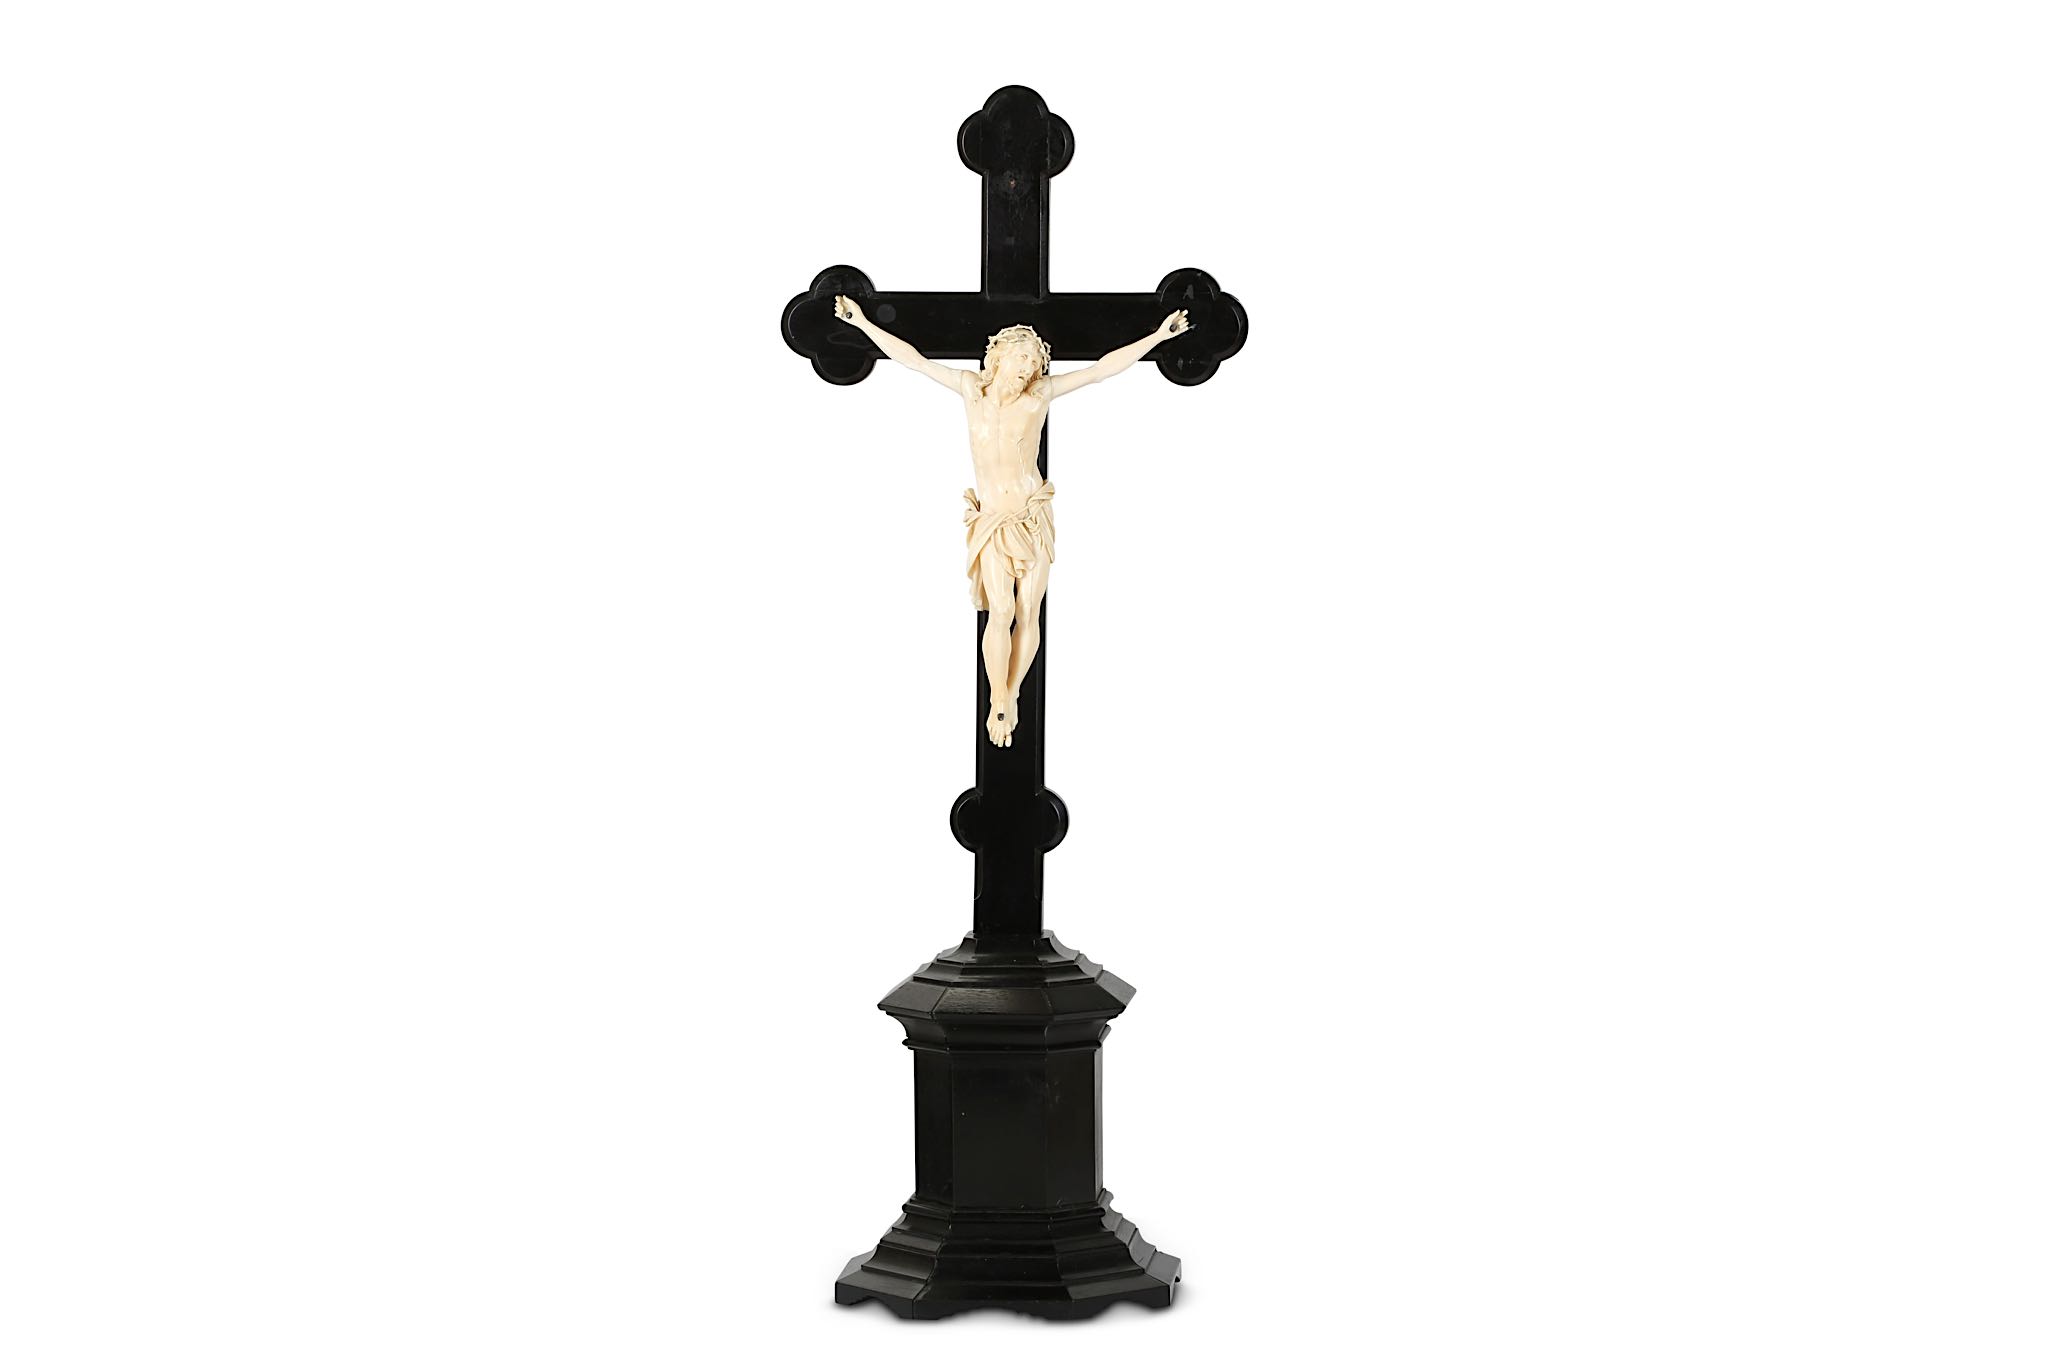 A 19TH CENTURY CARVED IVORY AND EBONY CRUCIFIX  the Corpus Christi figure of Christ depicted wearing